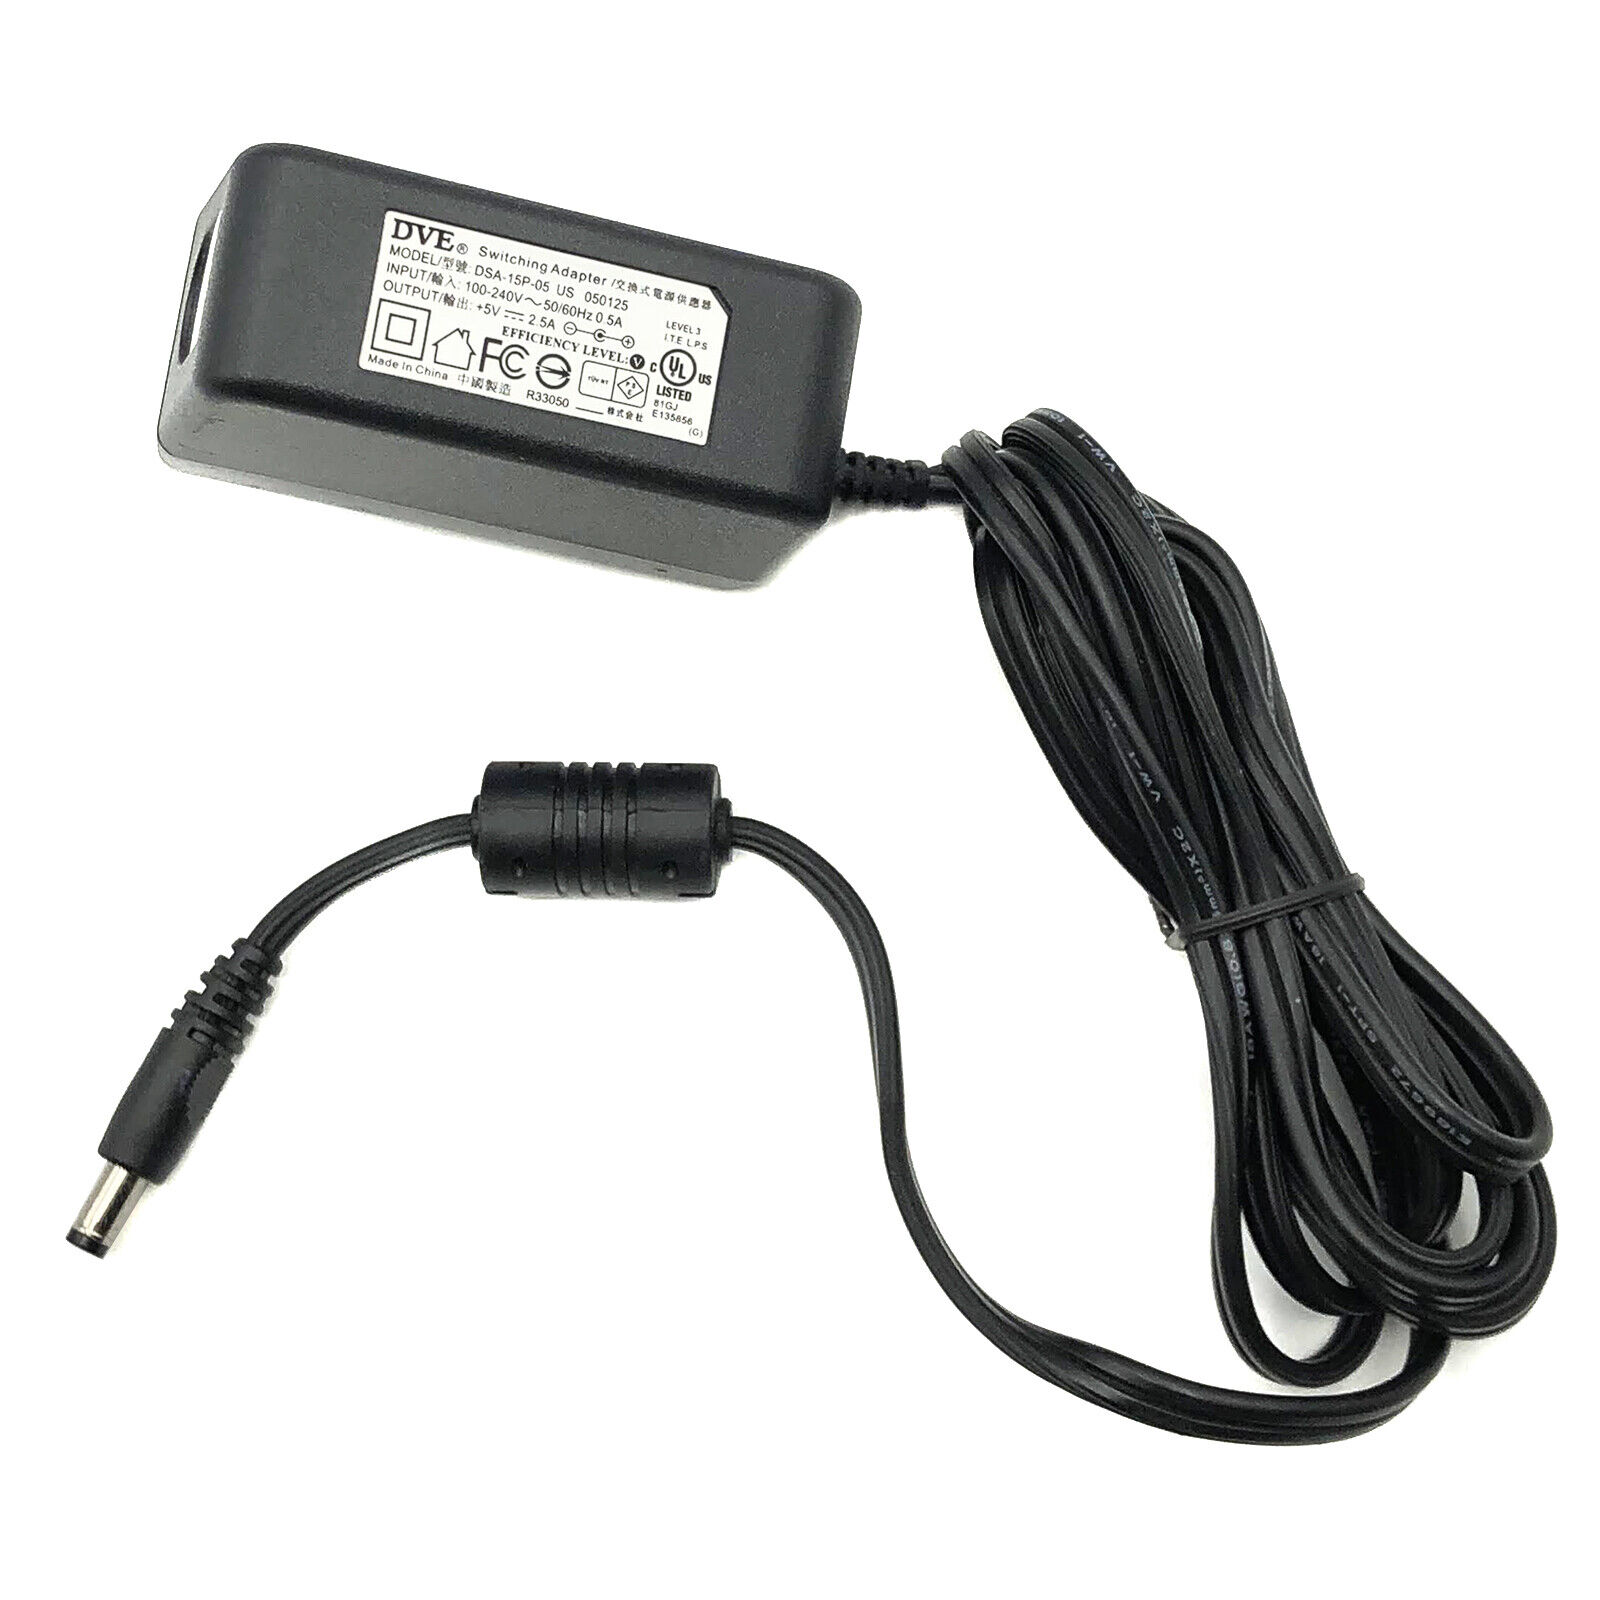 *Brand NEW*Genuine DVE 12.5W +5V 2.5A Switching AC Adapter Model DSA-15P-05 US 050125 Power Supply